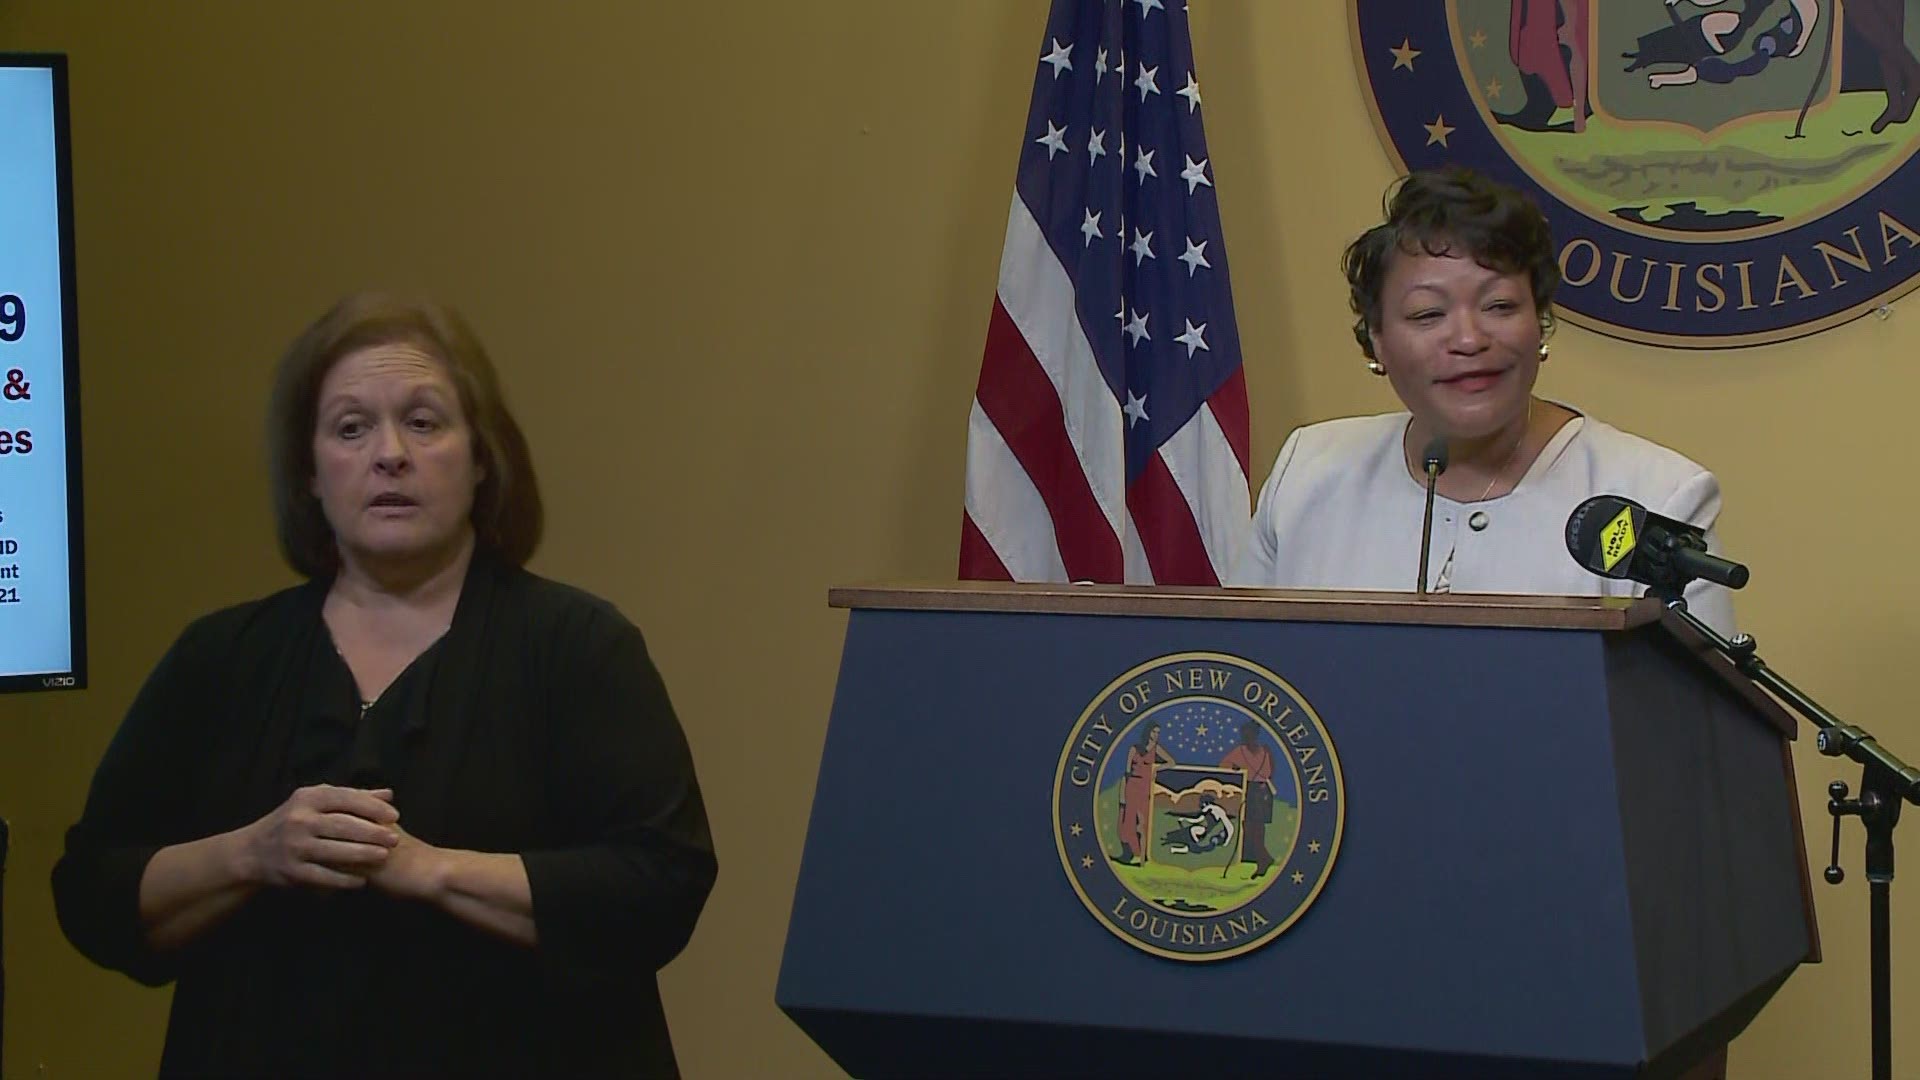 Mayor LaToya Cantrell announced an easing of COVID-19 restrictions on Wednesday.